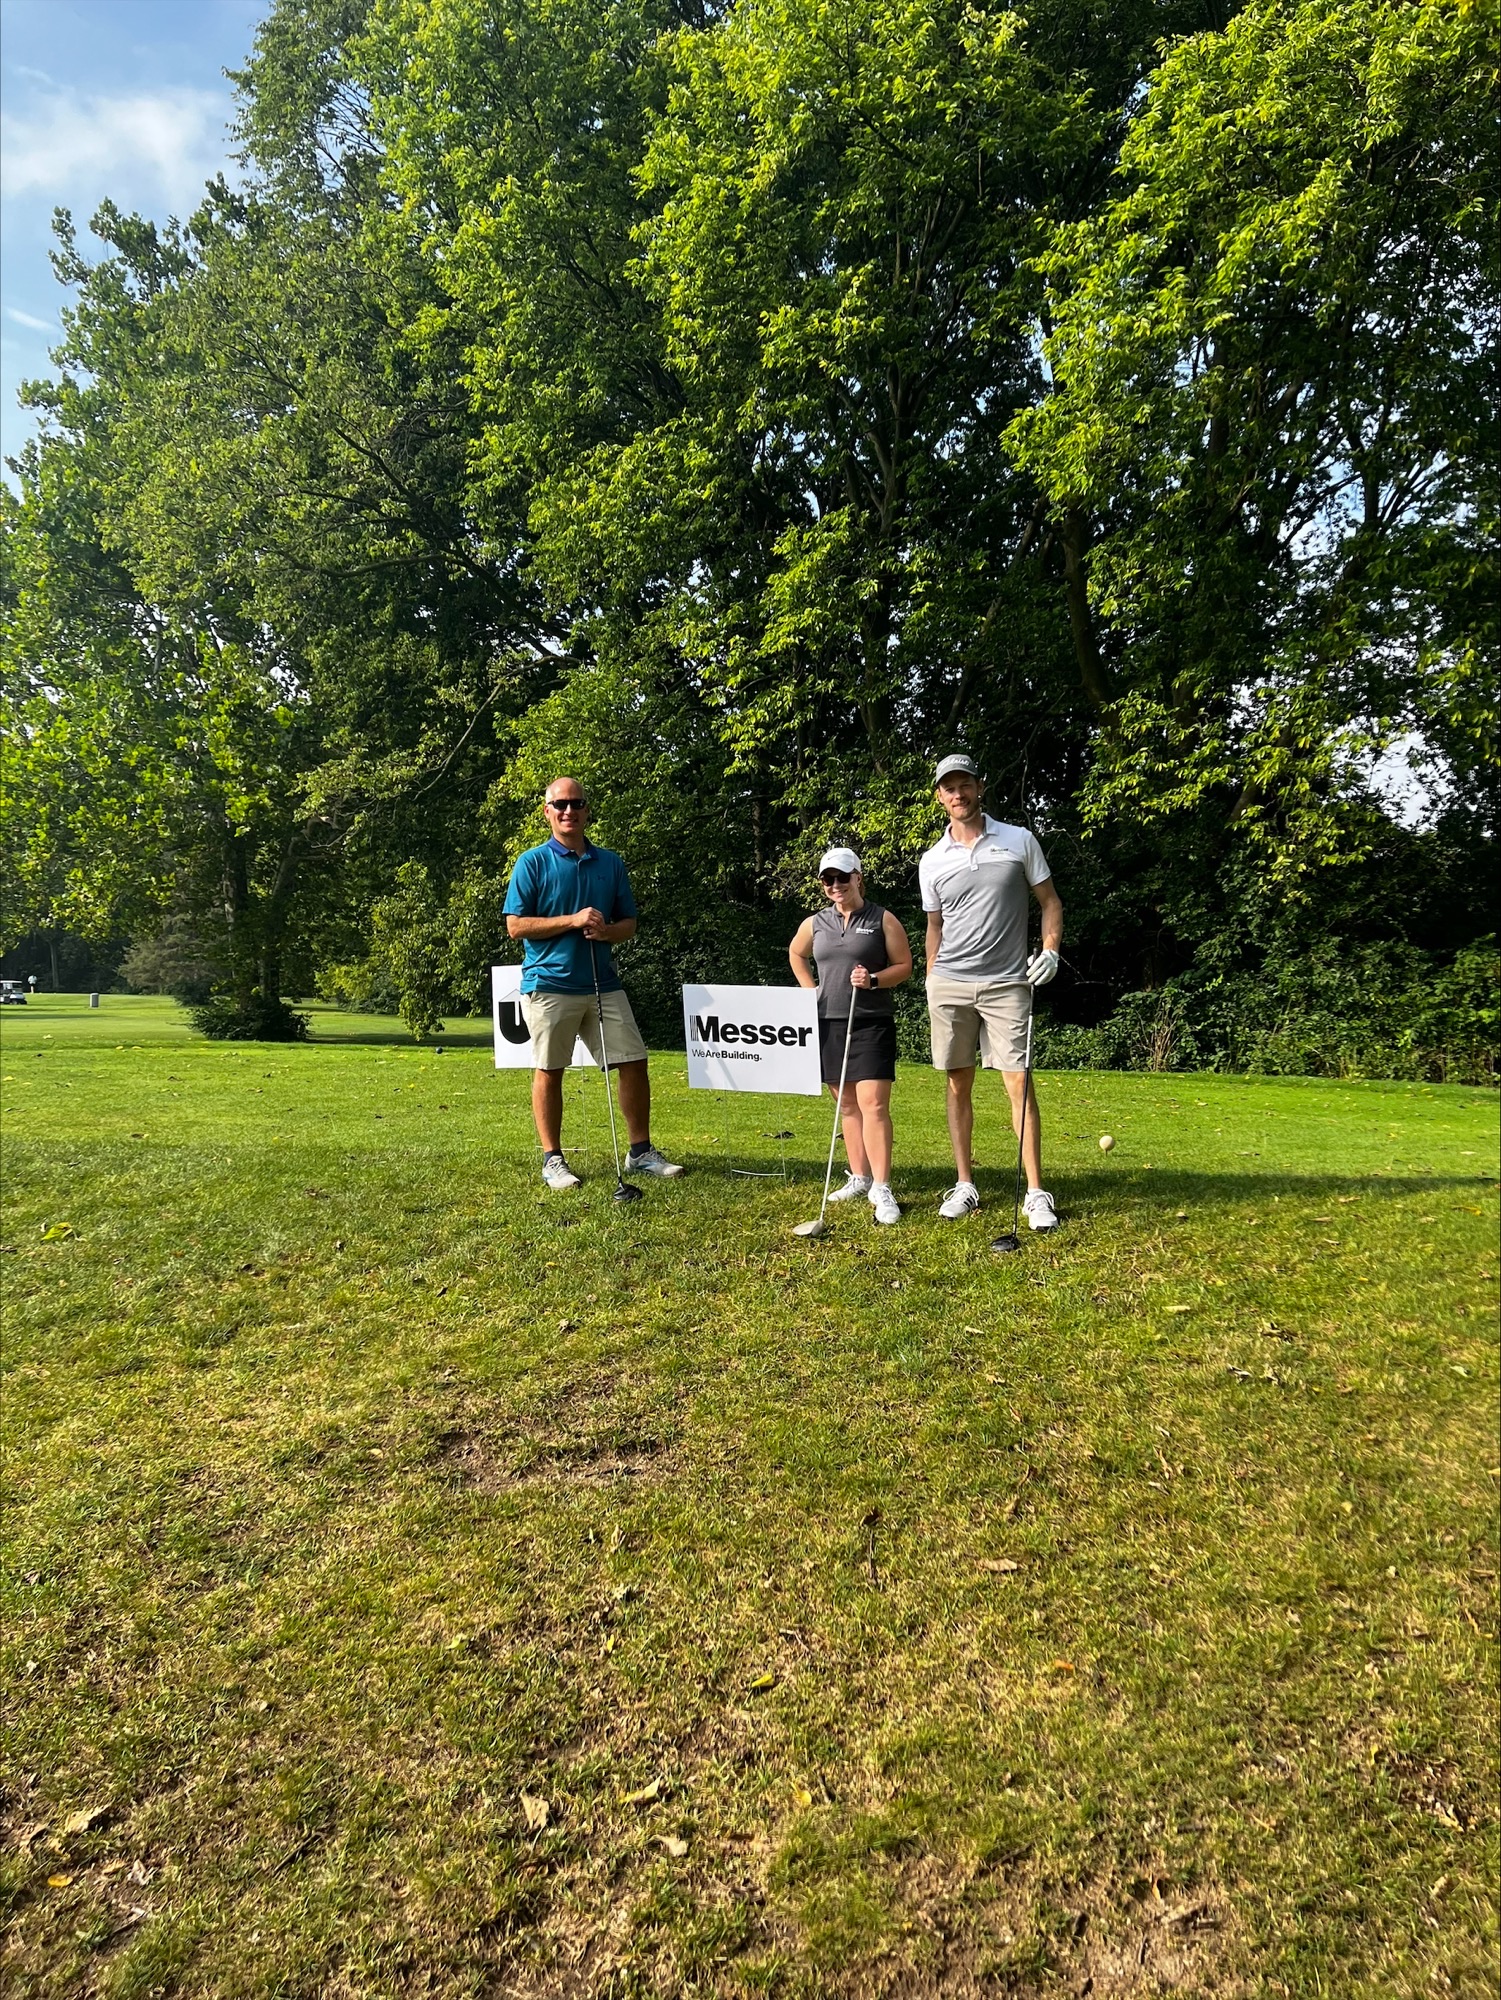 Messer Construction Company employees on the golf course